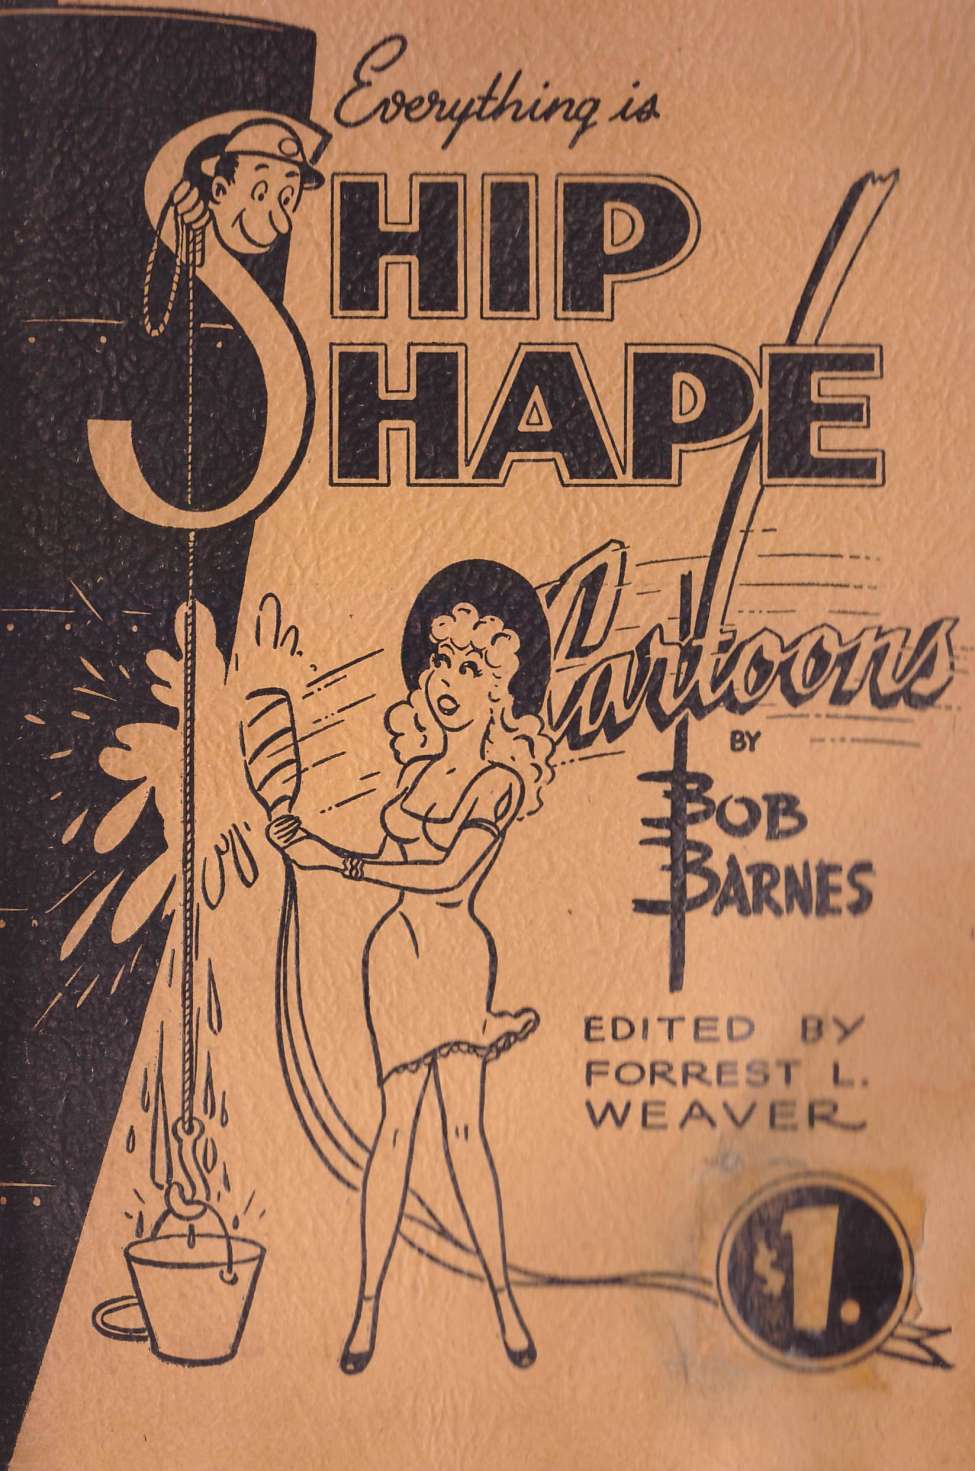 Book Cover For Everything is Ship Shape